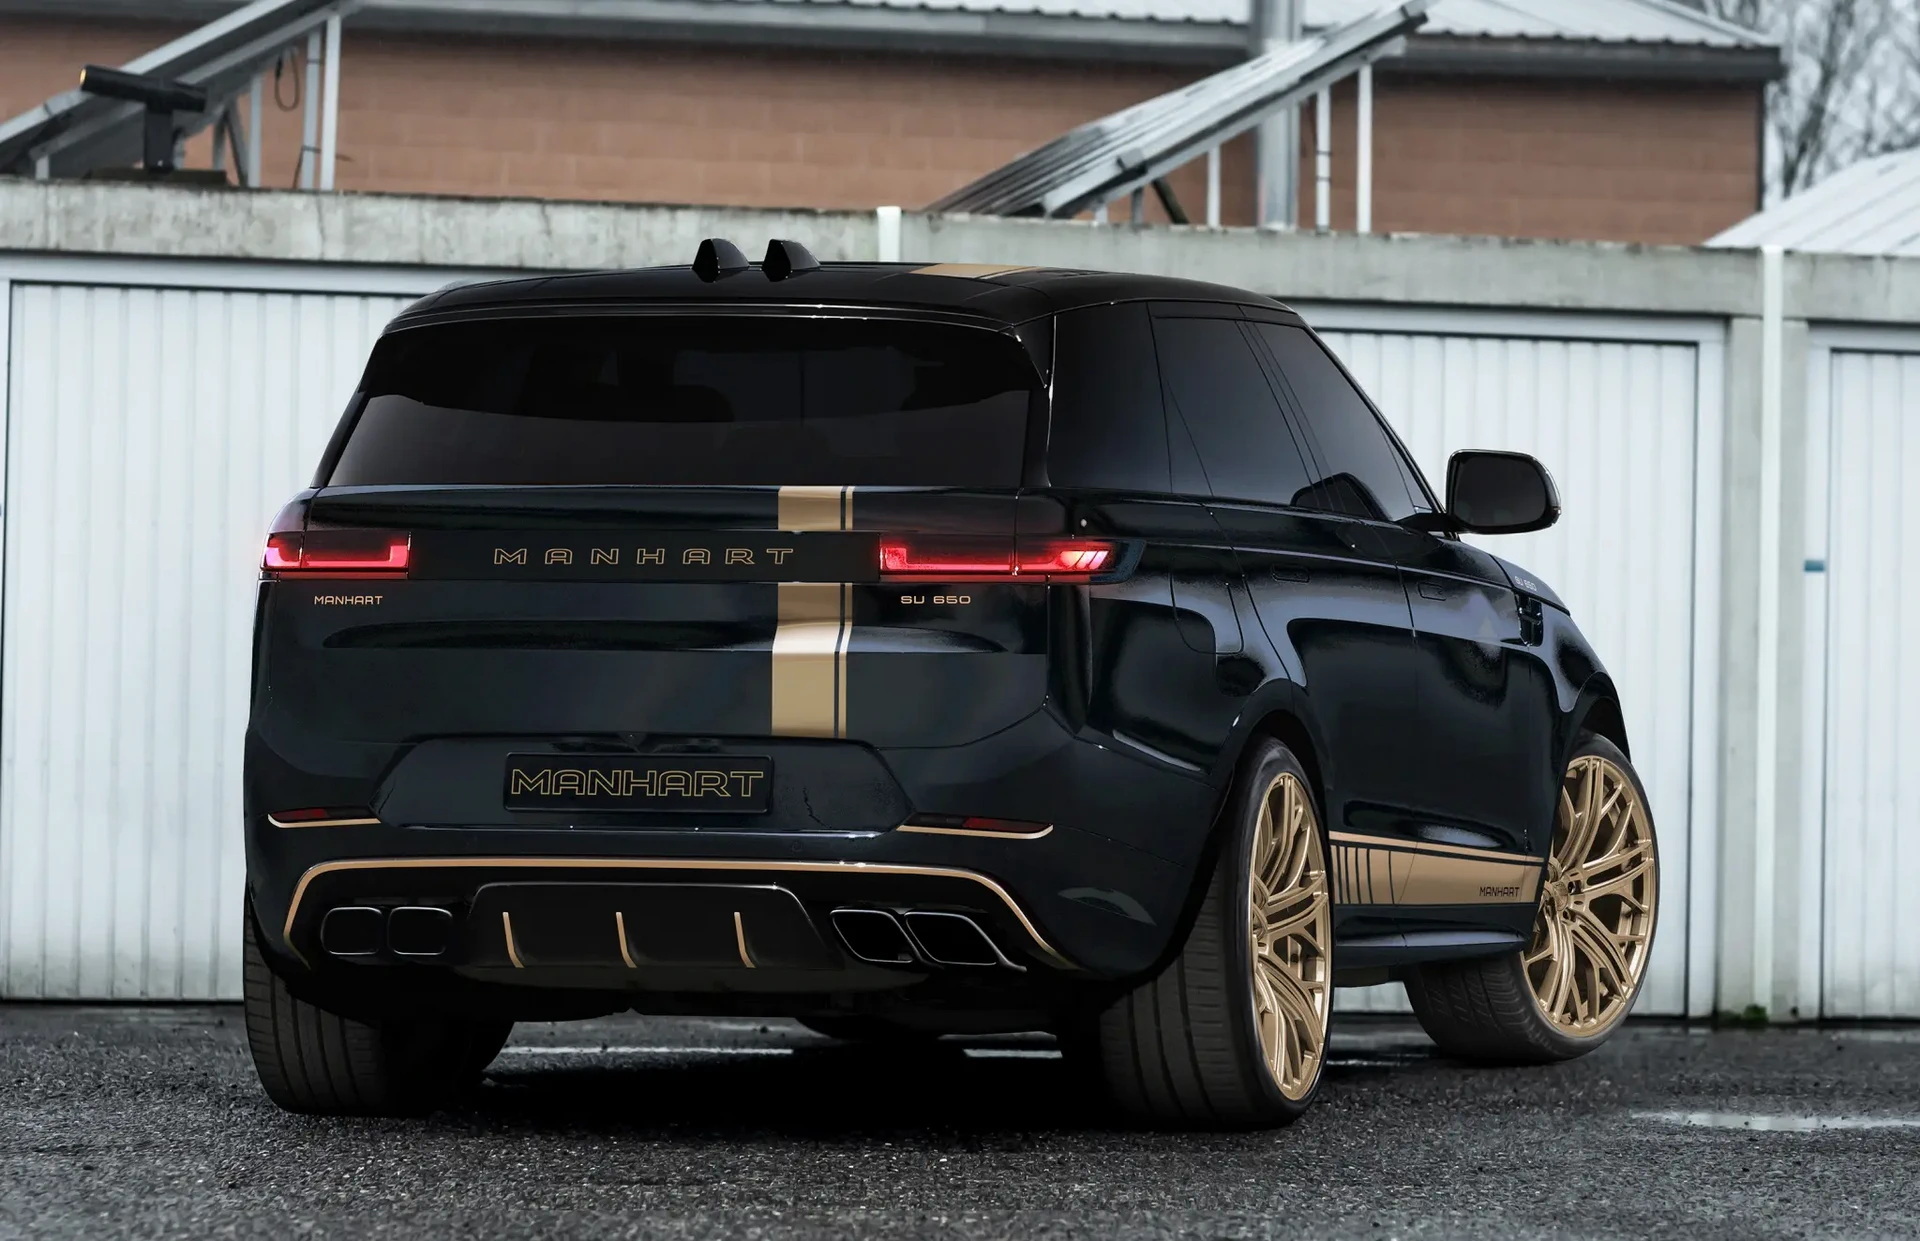 Manhart Previews Range Rover Sport With 641 HP And Gold 24Inch Wheels